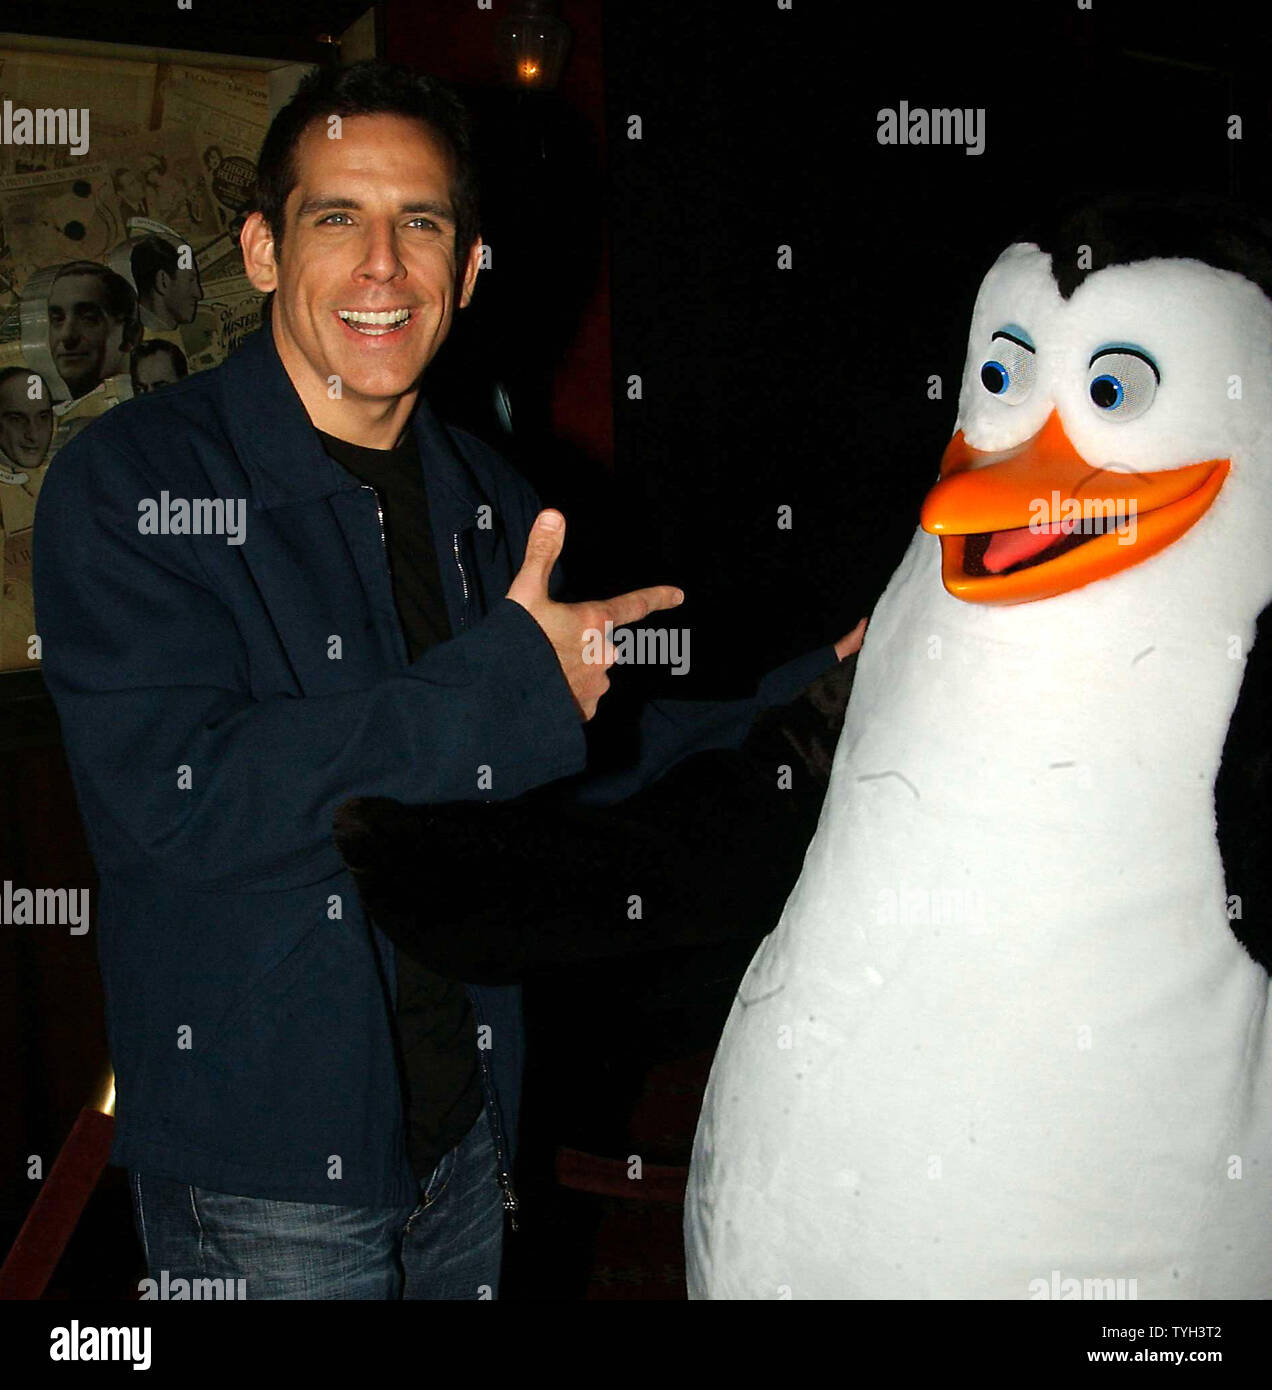 Actor Ben Stiller greets one of the penquins at the May 15, 2005 New York premiere of the Dreamworks animated film 'Madagascar' in which he stars.   (UPI Photo/Ezio Petersen) Stock Photo